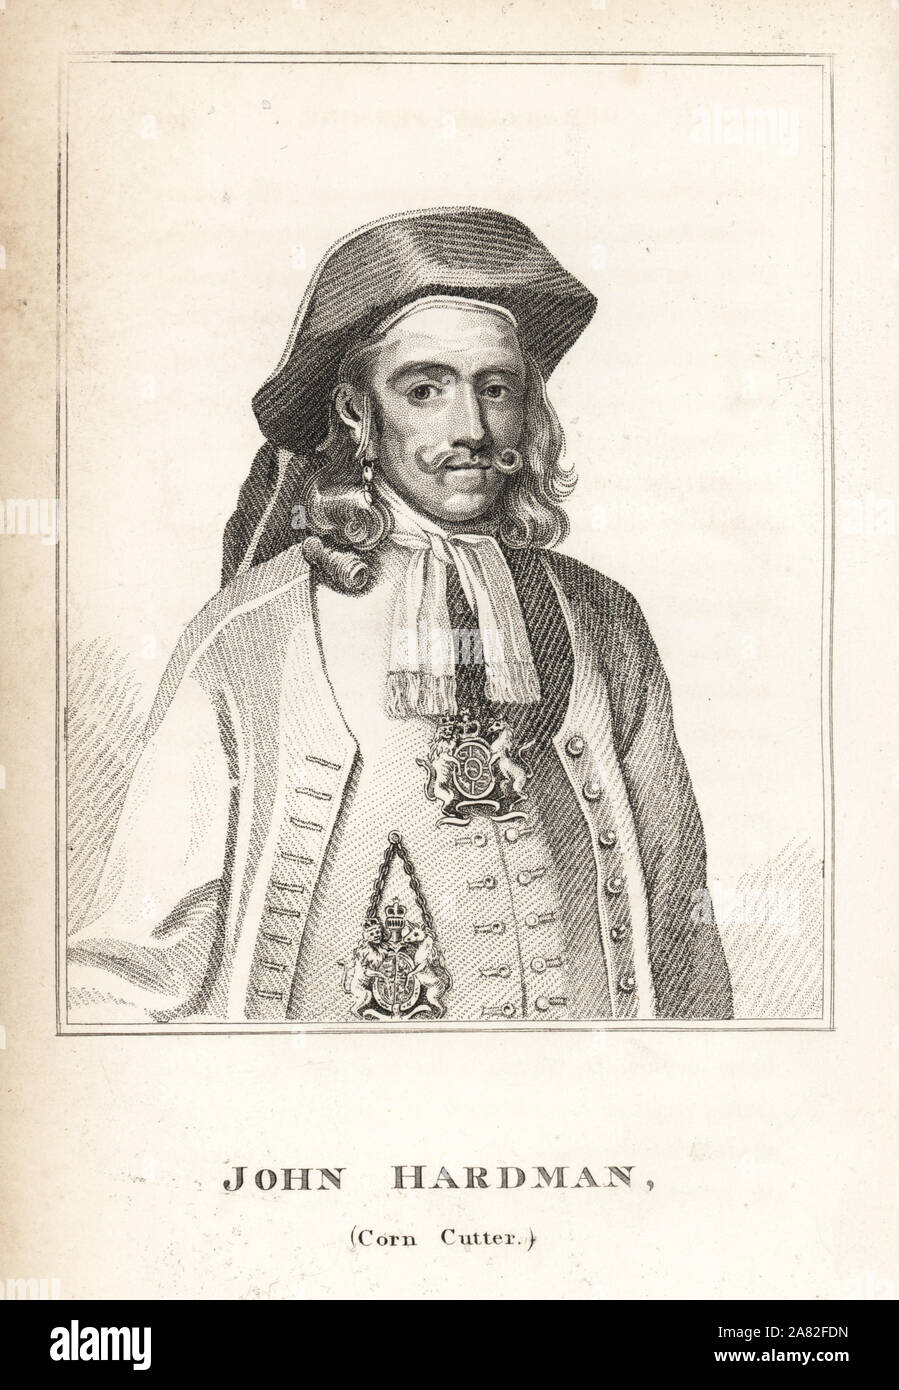 John Hardman, corn cutter and bunion doctor to King William III. Engraving from James Caulfield's Portraits, Memoirs and Characters of Remarkable Persons, London, 1819. Stock Photo